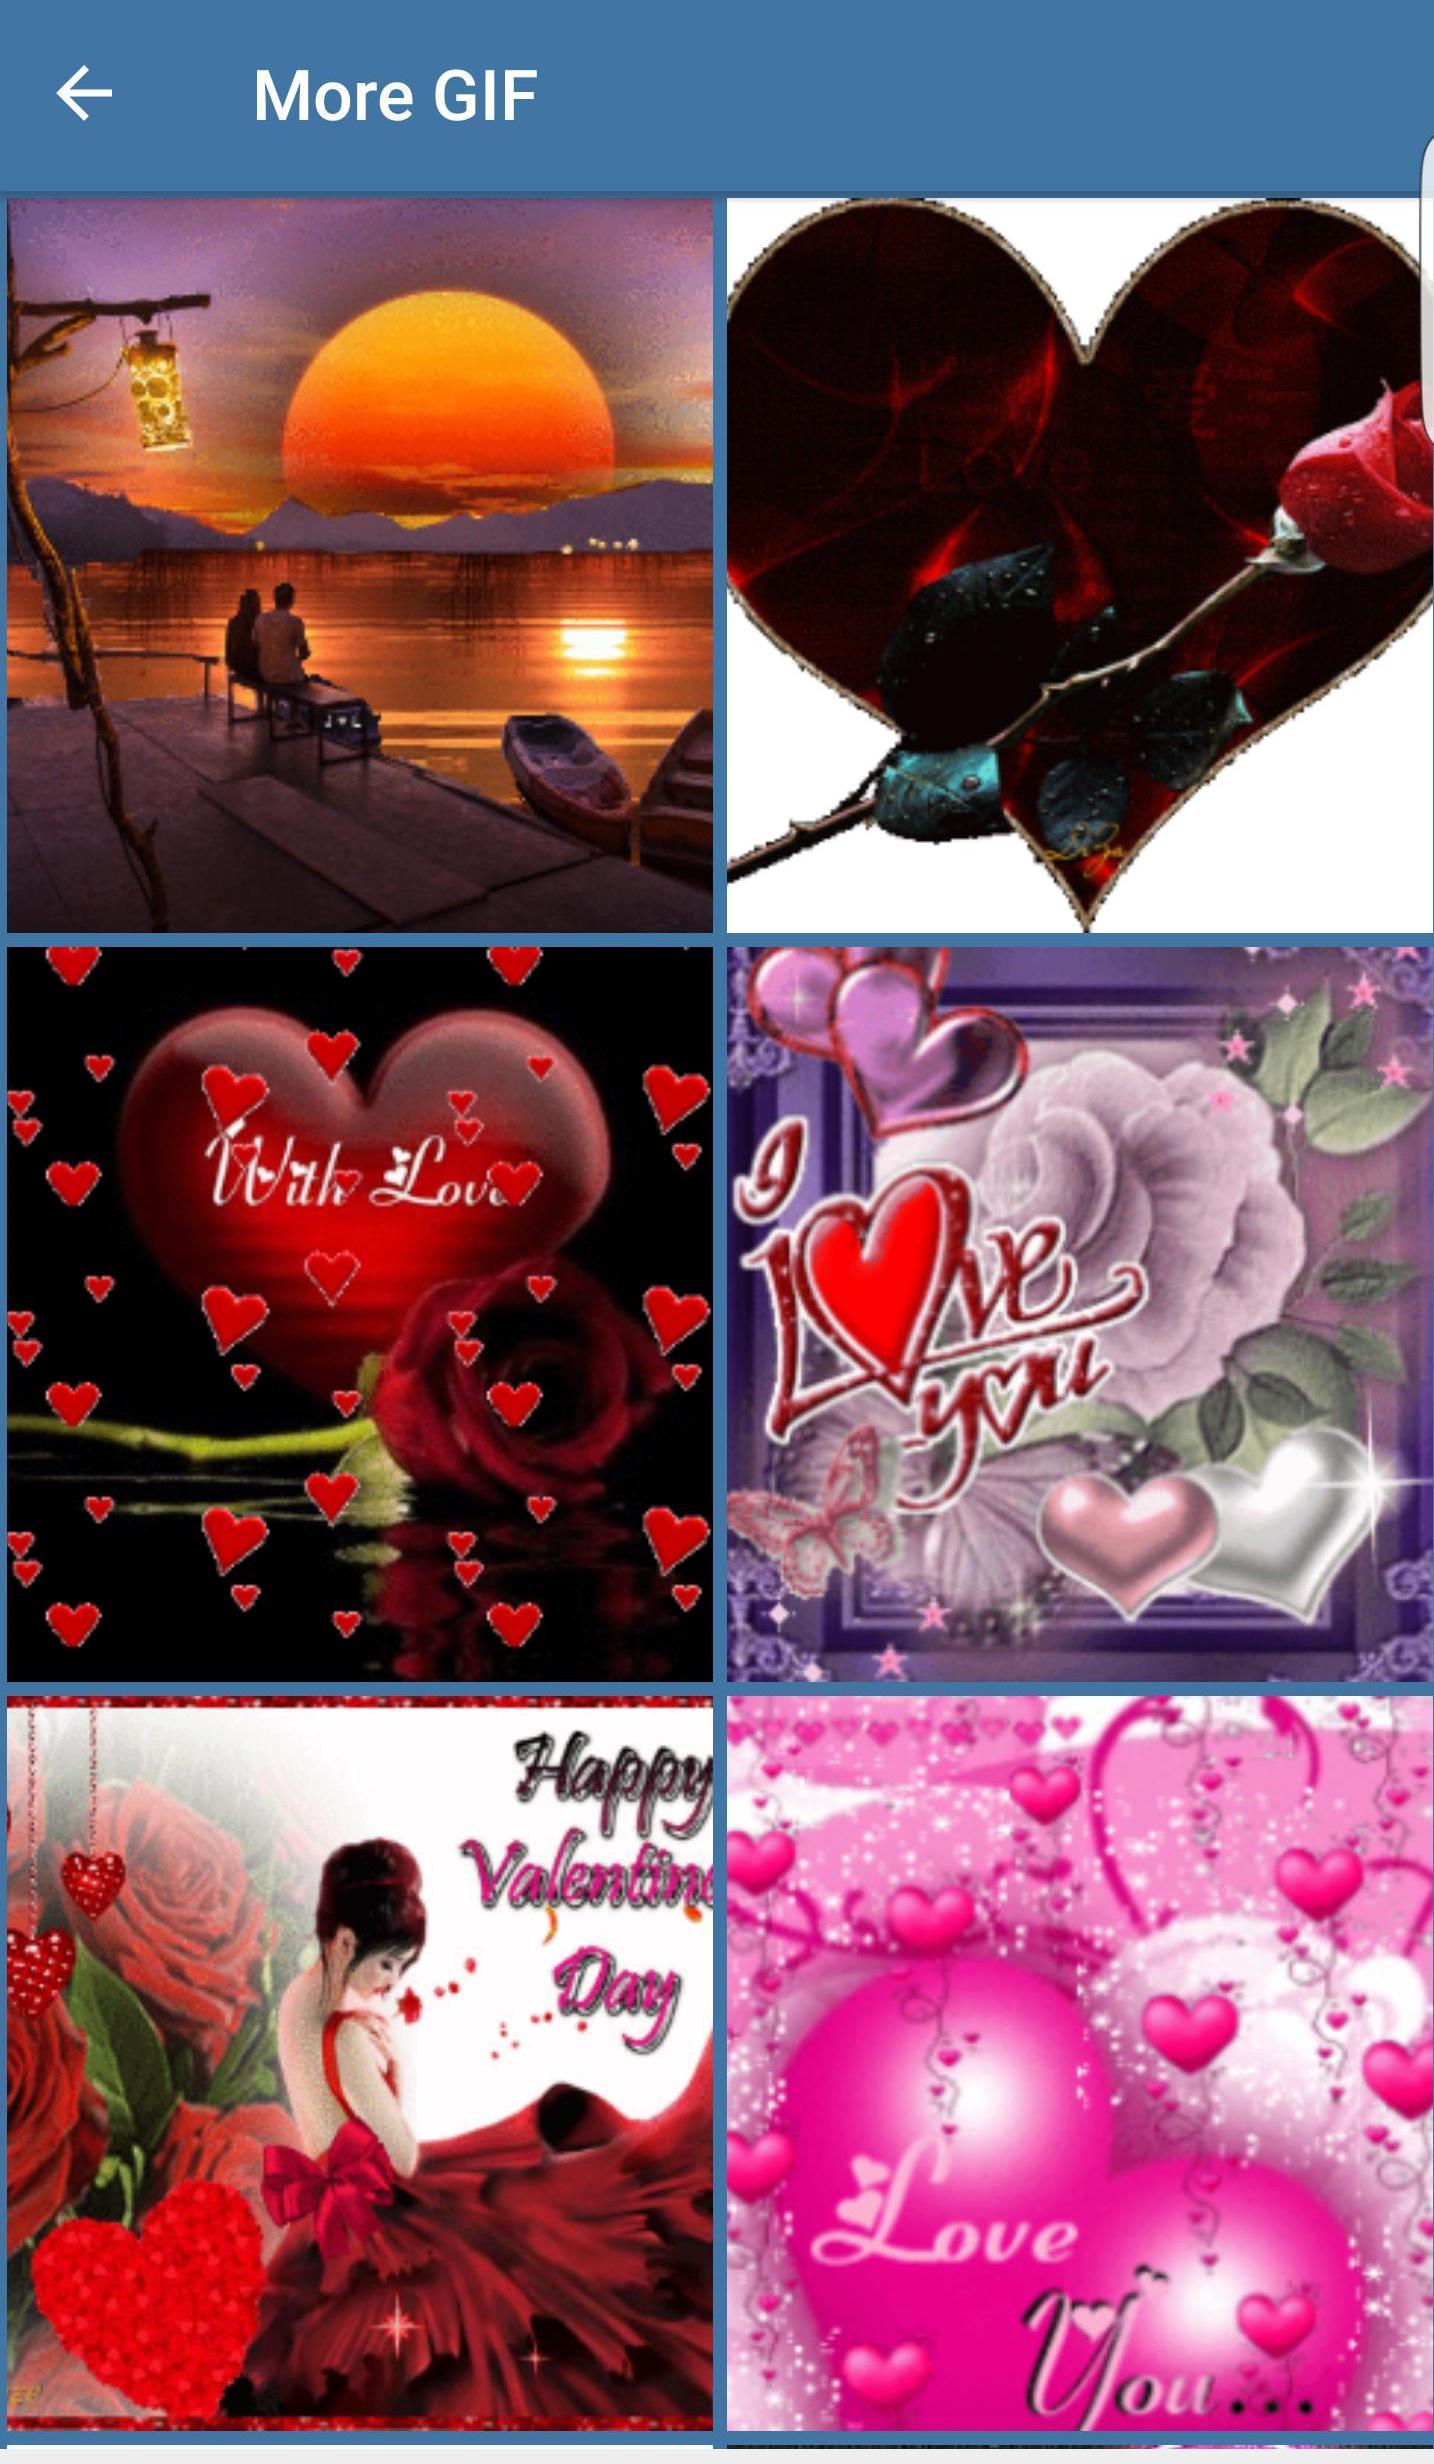 I Love You Gif Image For Android Apk Download